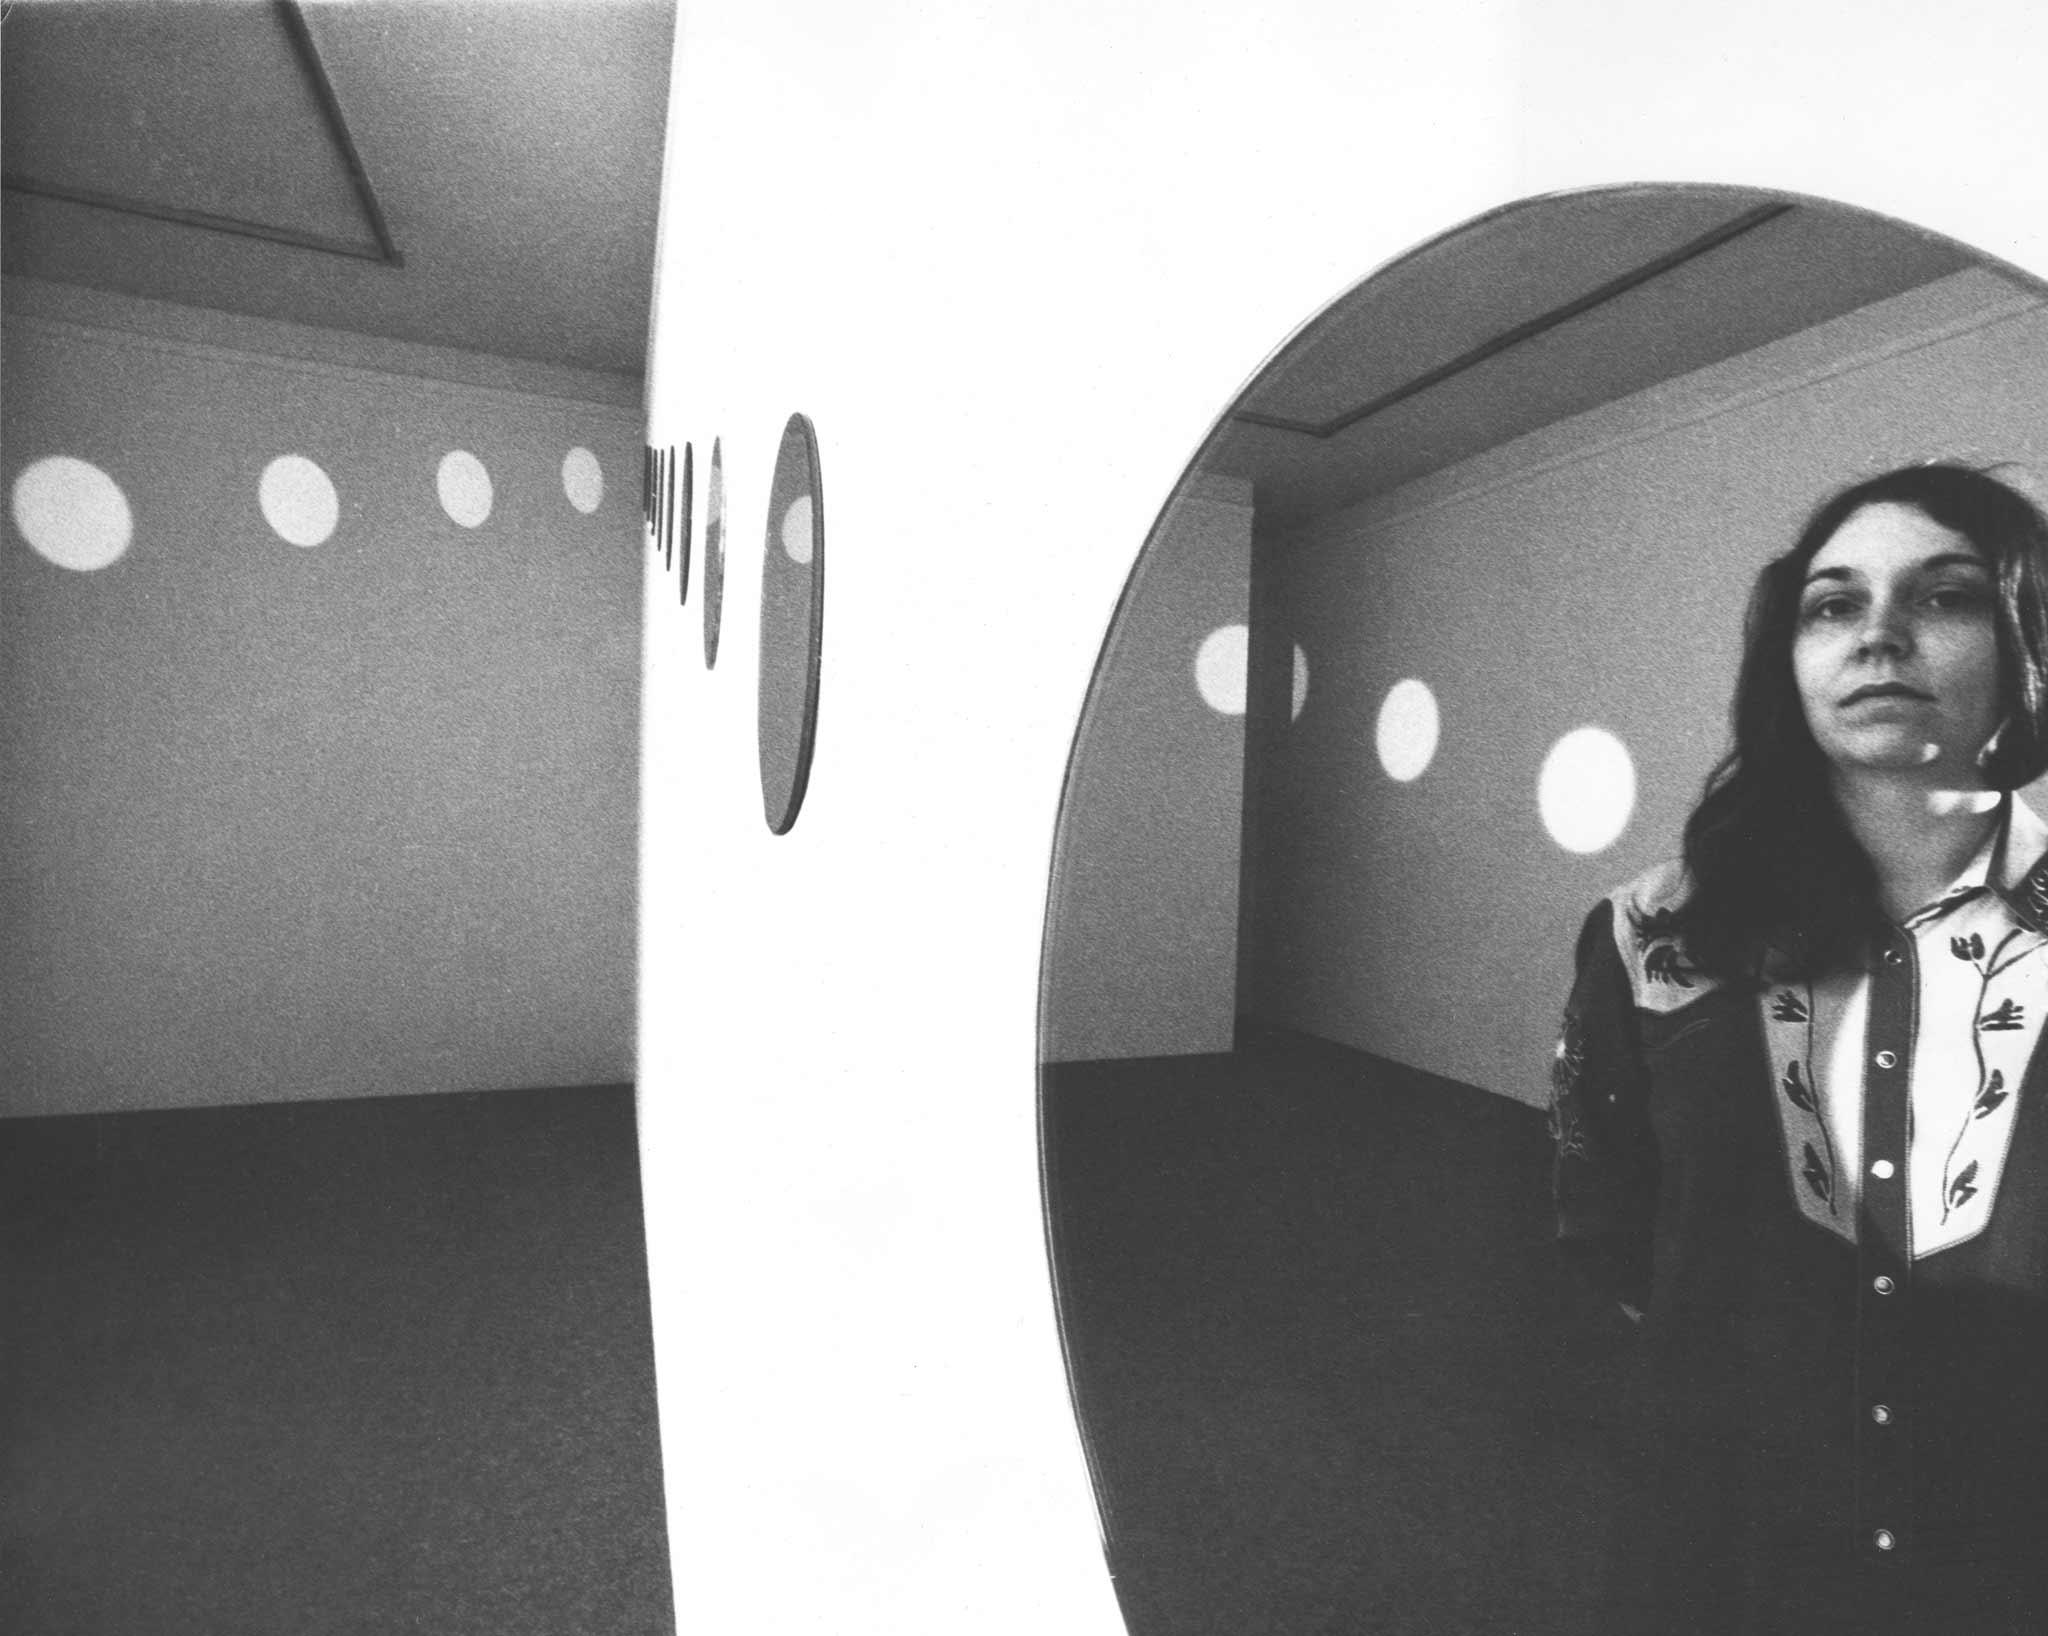 Nancy Holt with Mirrors of Light II at Walter Kelly Gallery, Chicago, Illinois, in 1974.